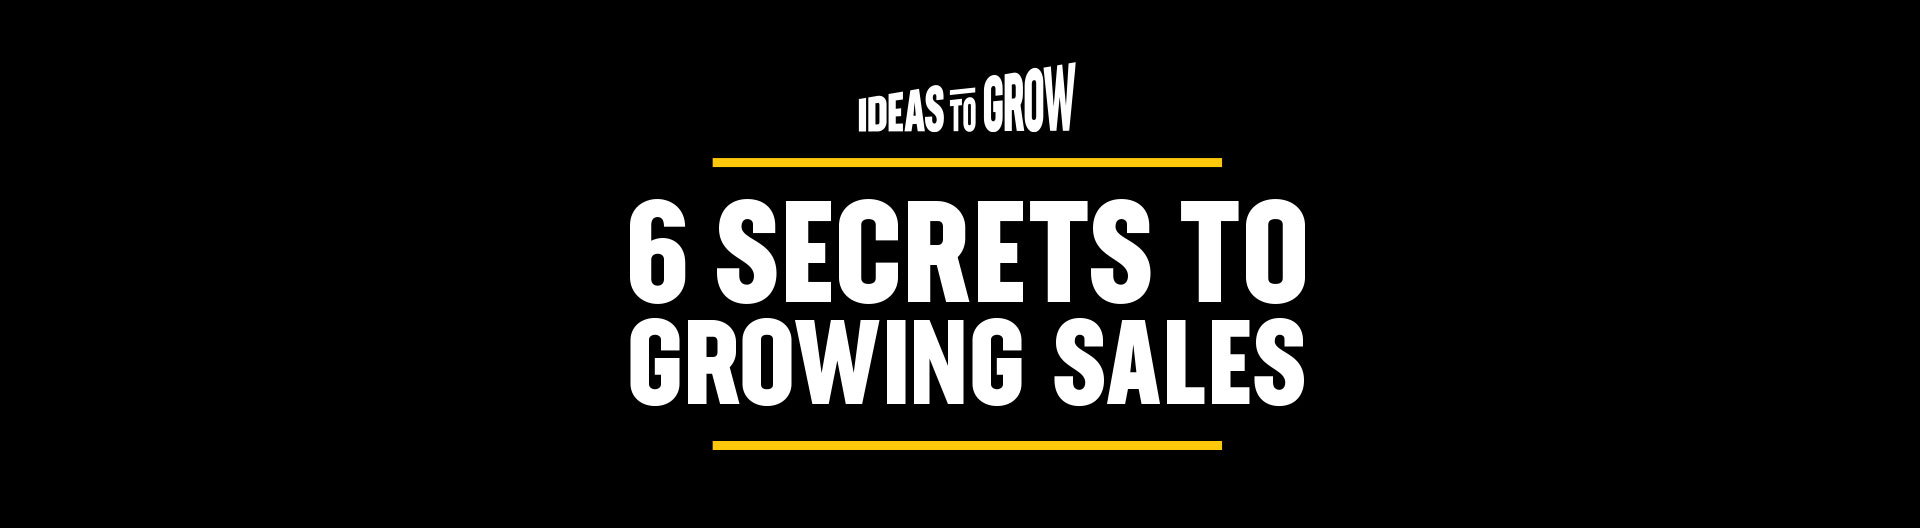 Ideas To Grow | 6 Secrets To Growing Sales | Dave Coyle | Video Marketing at Cleaner's Supply